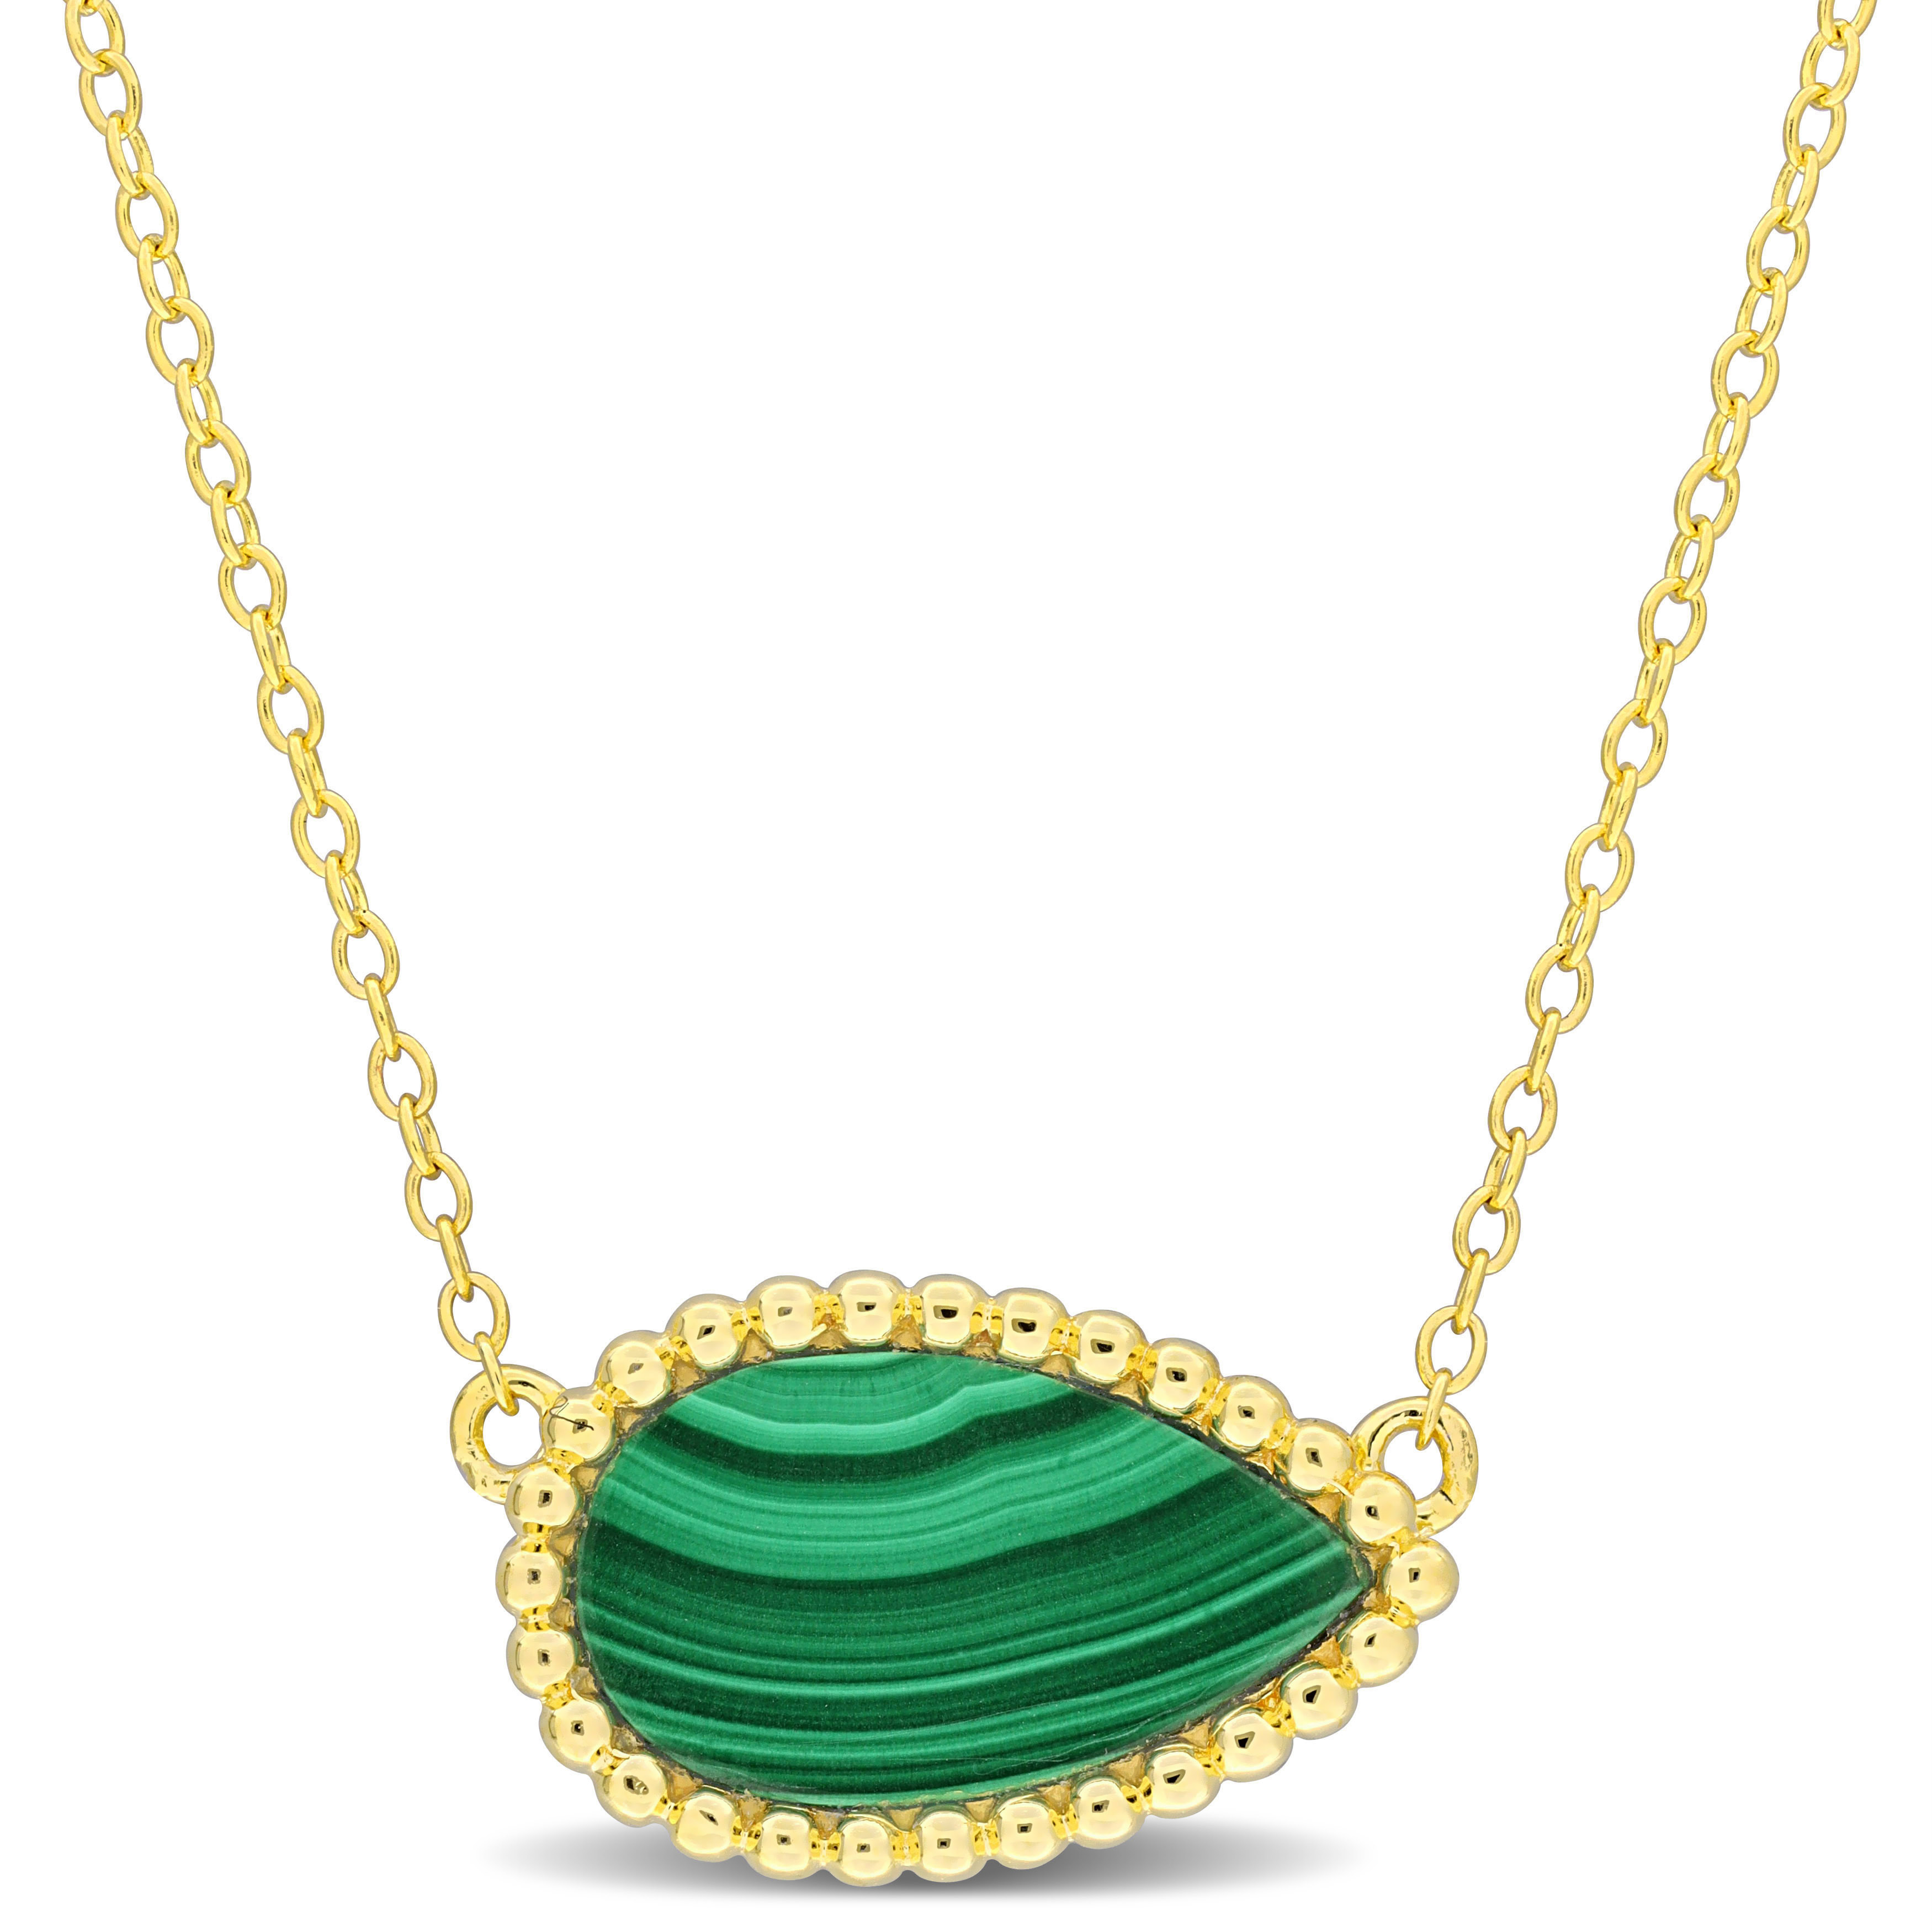 4 CT TGW Pear Shape Malachite Necklace With Beaded Halo in Yellow Plated Sterling Silver - 17 in.